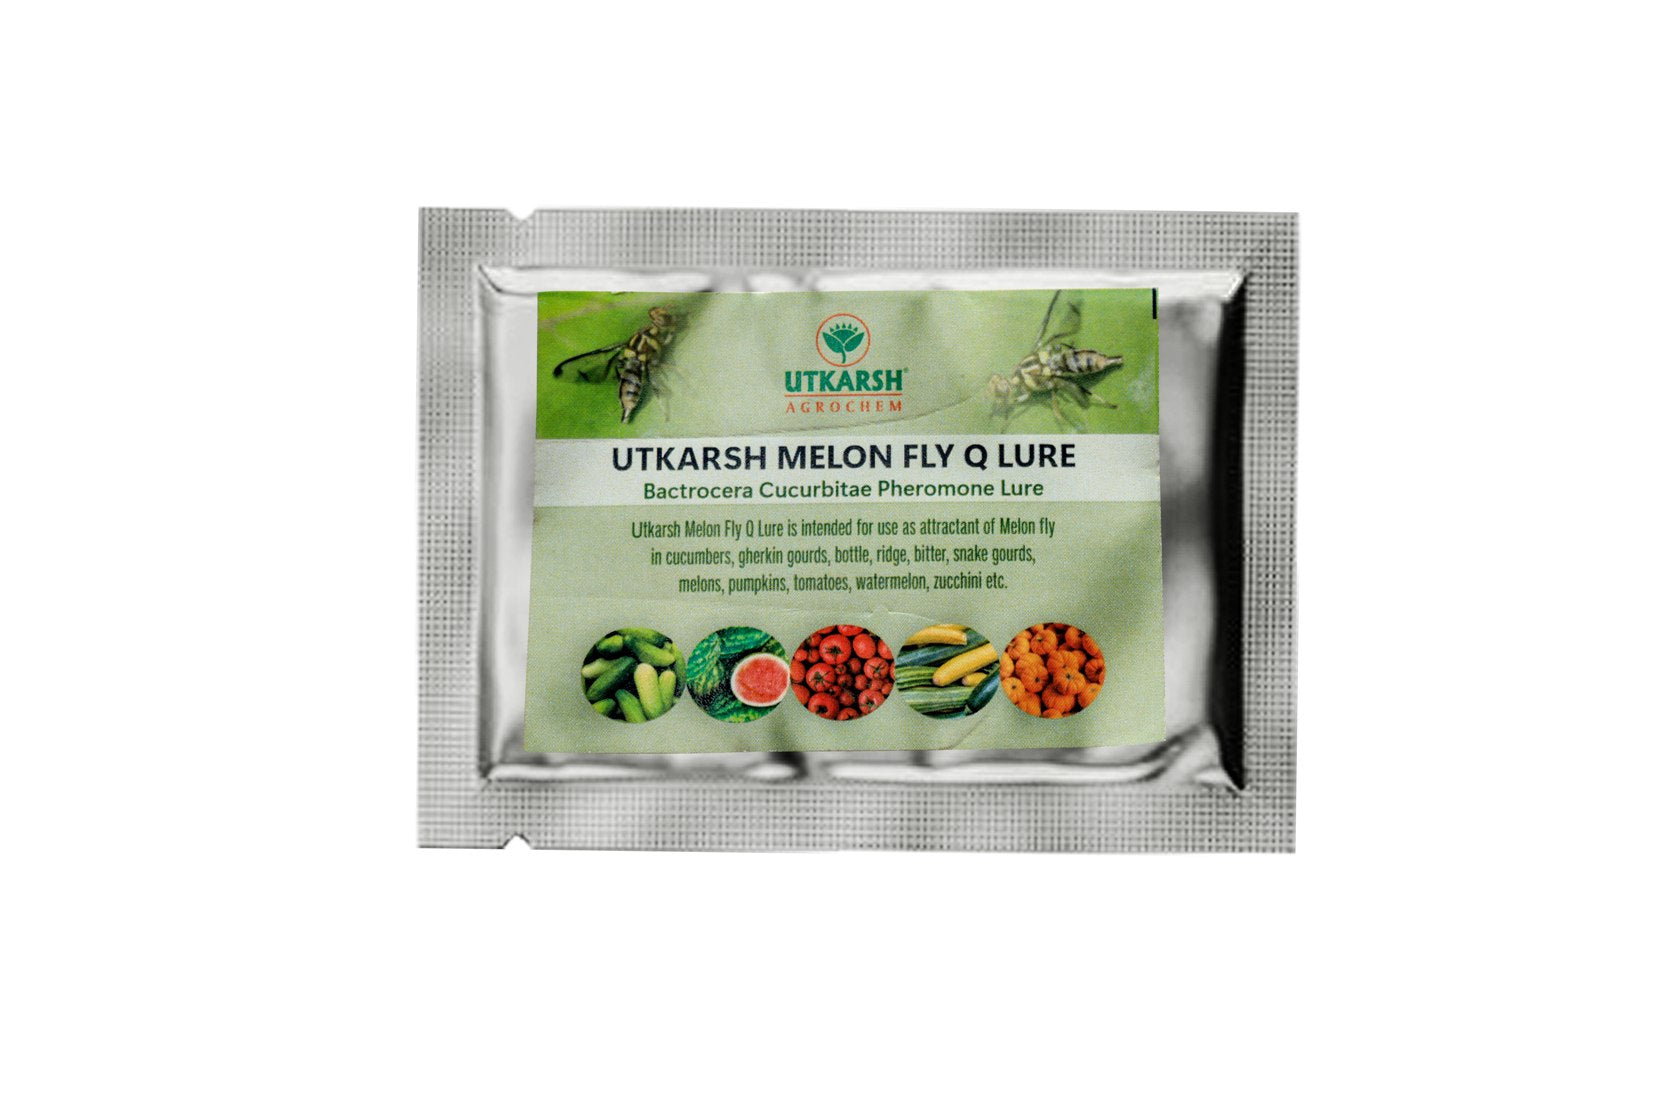 Utkarsh Melon Fly Bactrocera Cucurbitae Pheromone Lure for Catching Fruit Fly of Gourds, Melons, Pumpkin, Cucumber, Tomato, Zucchini, Beans and Other Crops